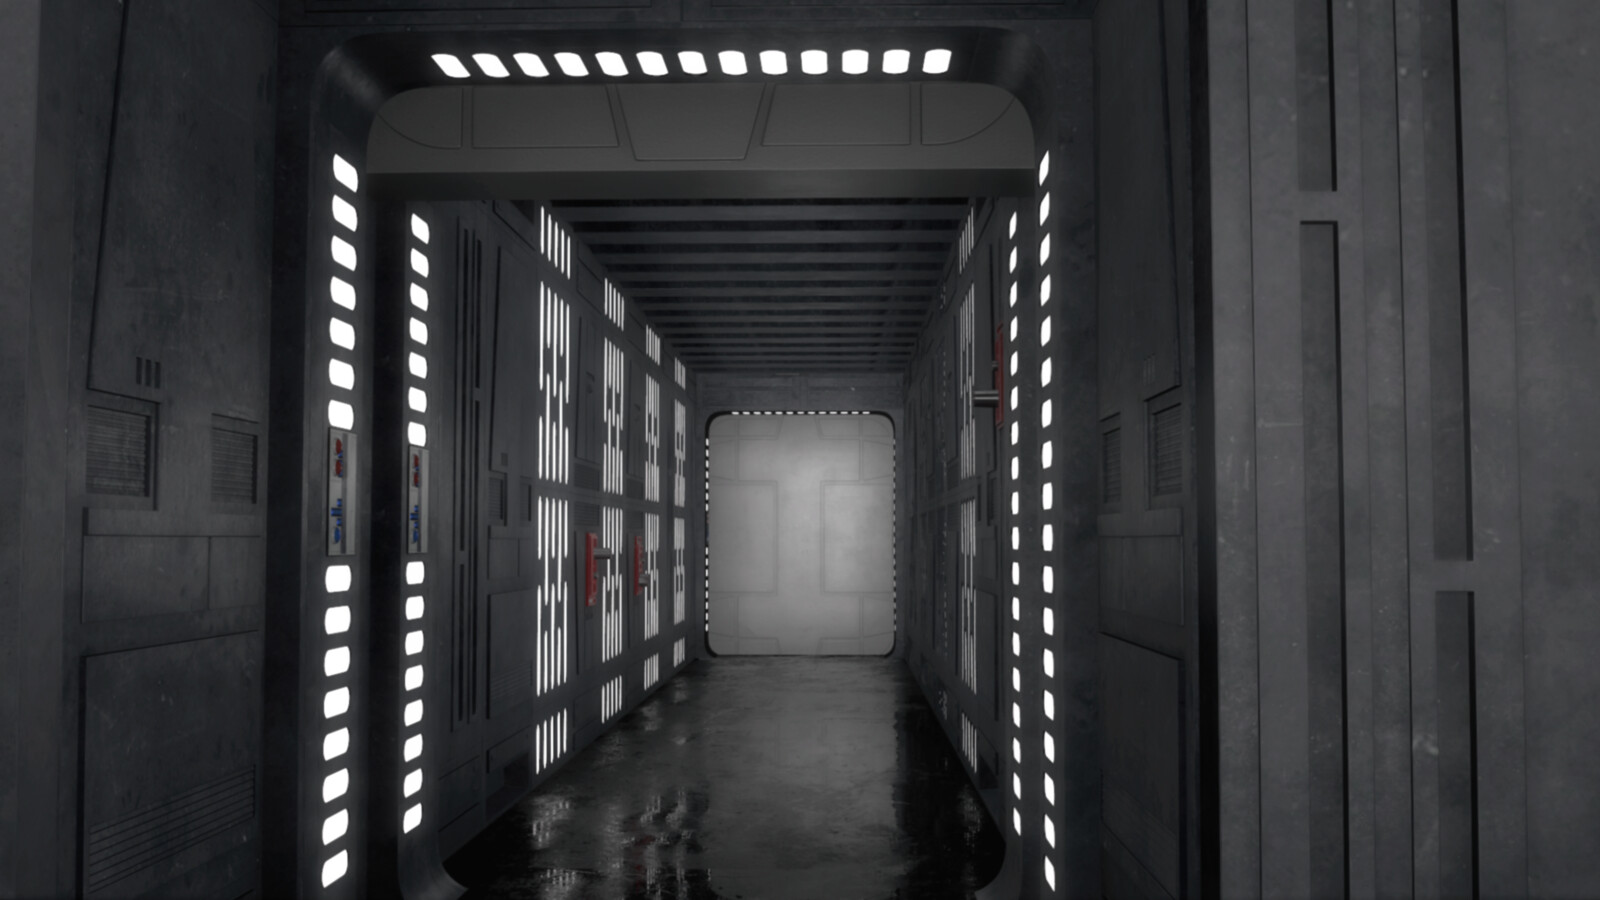 Some early test shots I did of the corridor environments I modeled for the film. 